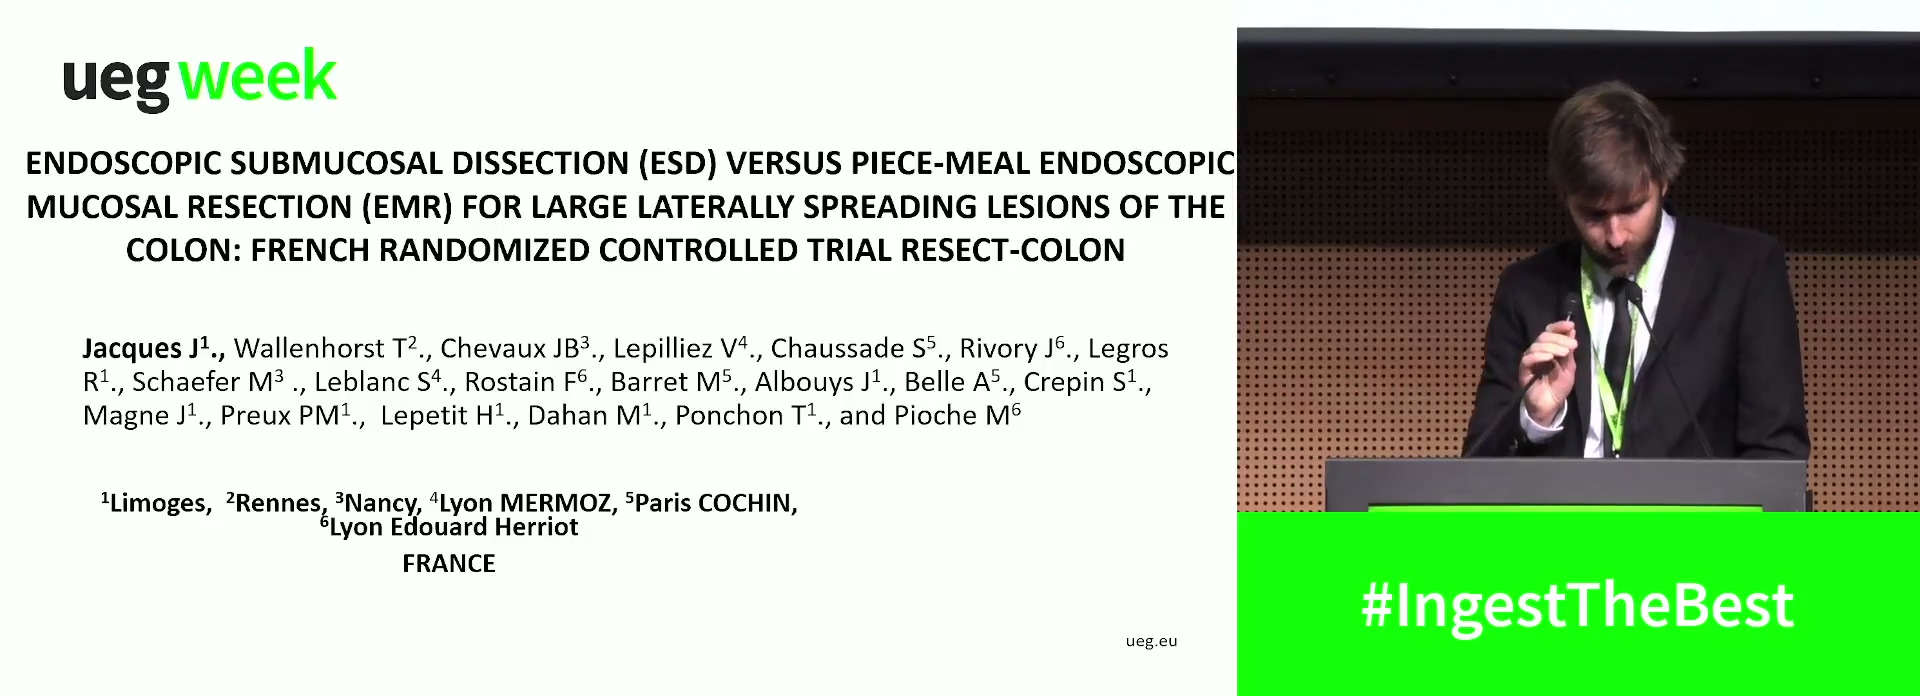 EN BLOC RESECTION BY ENDOSCOPIC SUBMUCOSAL DISSECTIONVERSUSENDOSCOPIC PIECEMEAL MUCOSAL RESECTION FOR LARGE NON-PEDUNCULATED COLONIC ADENOMAS: A RANDOMIZED COMPARATIVE TRIAL (RESECT COLON)